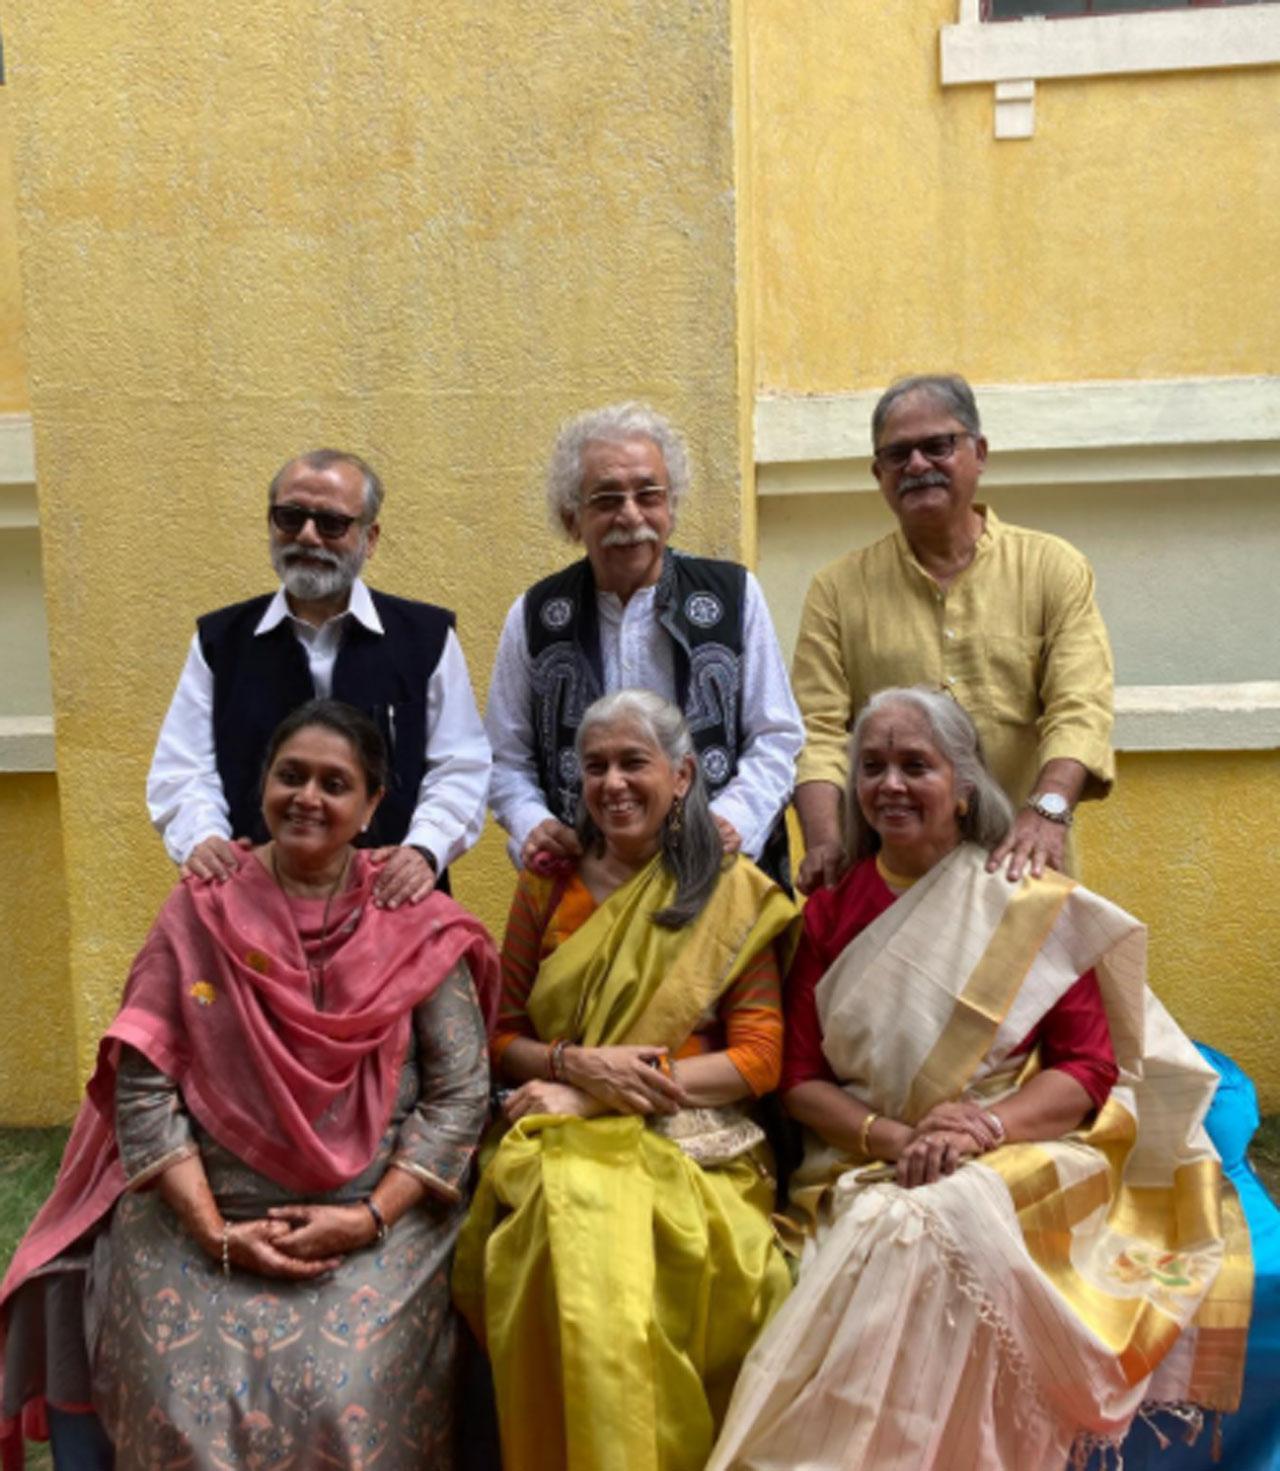 Taking to Instagram Story, he shared several clips from one of the functions, in which Sanah's mother Supriya Pathak and her sister and actor Ratna Pathak can be seen dancing together. For the unversed, Sanah is Pankaj Kapur's daughter with his second wife Supriya Pathak. She was featured alongside Shahid Kapoor in the film 'Shaandaar' (2015). 